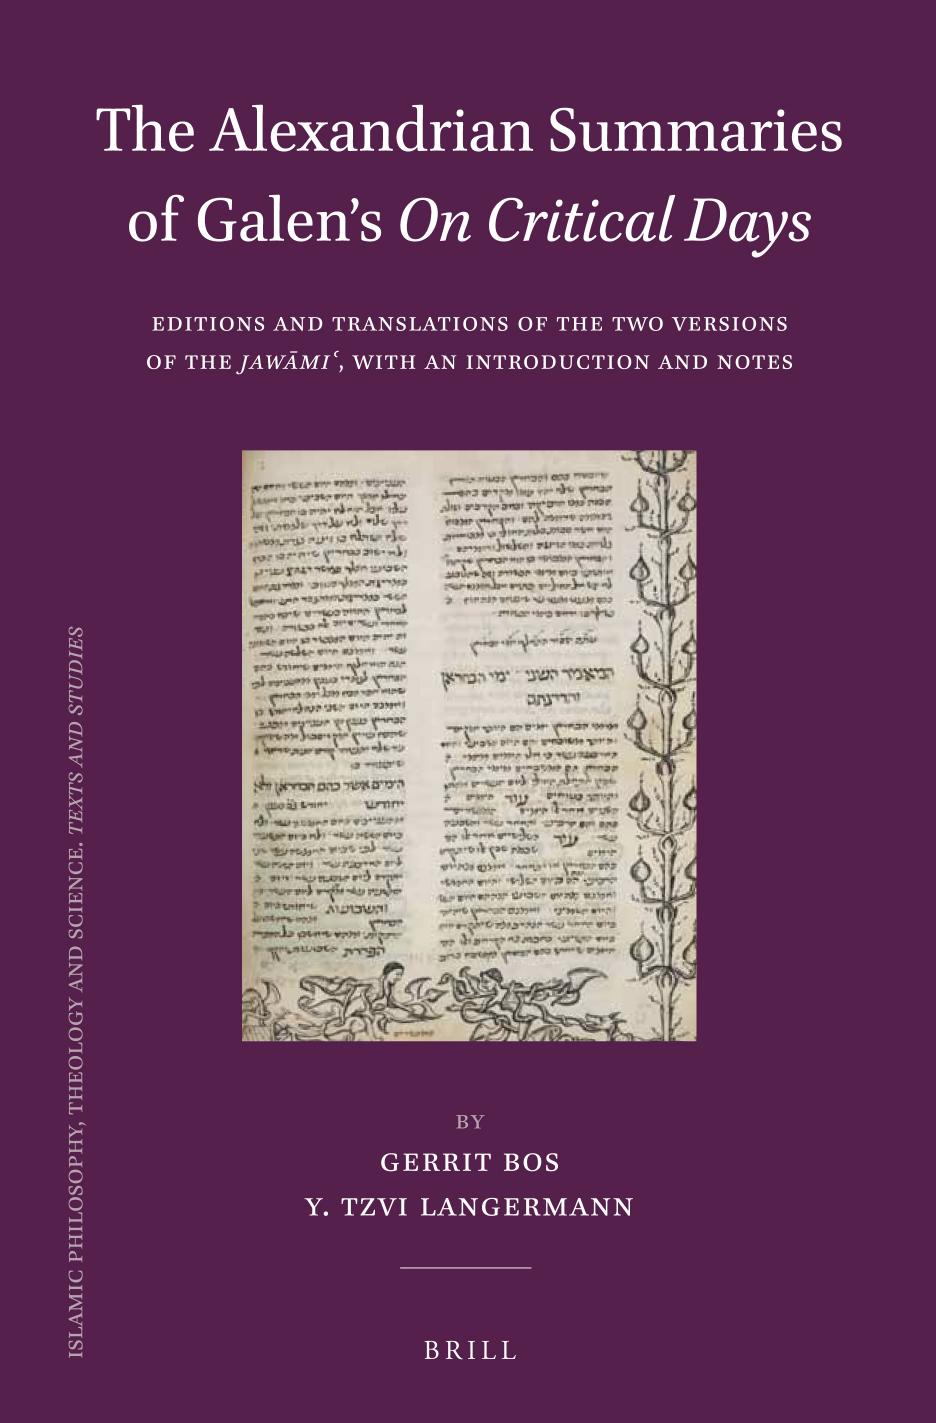 The Alexandrian Summaries of Galen’s On Critical Days: Editions and Translations of the Two Versions of the JAWĀMIʿ, with an Introduction and Notes